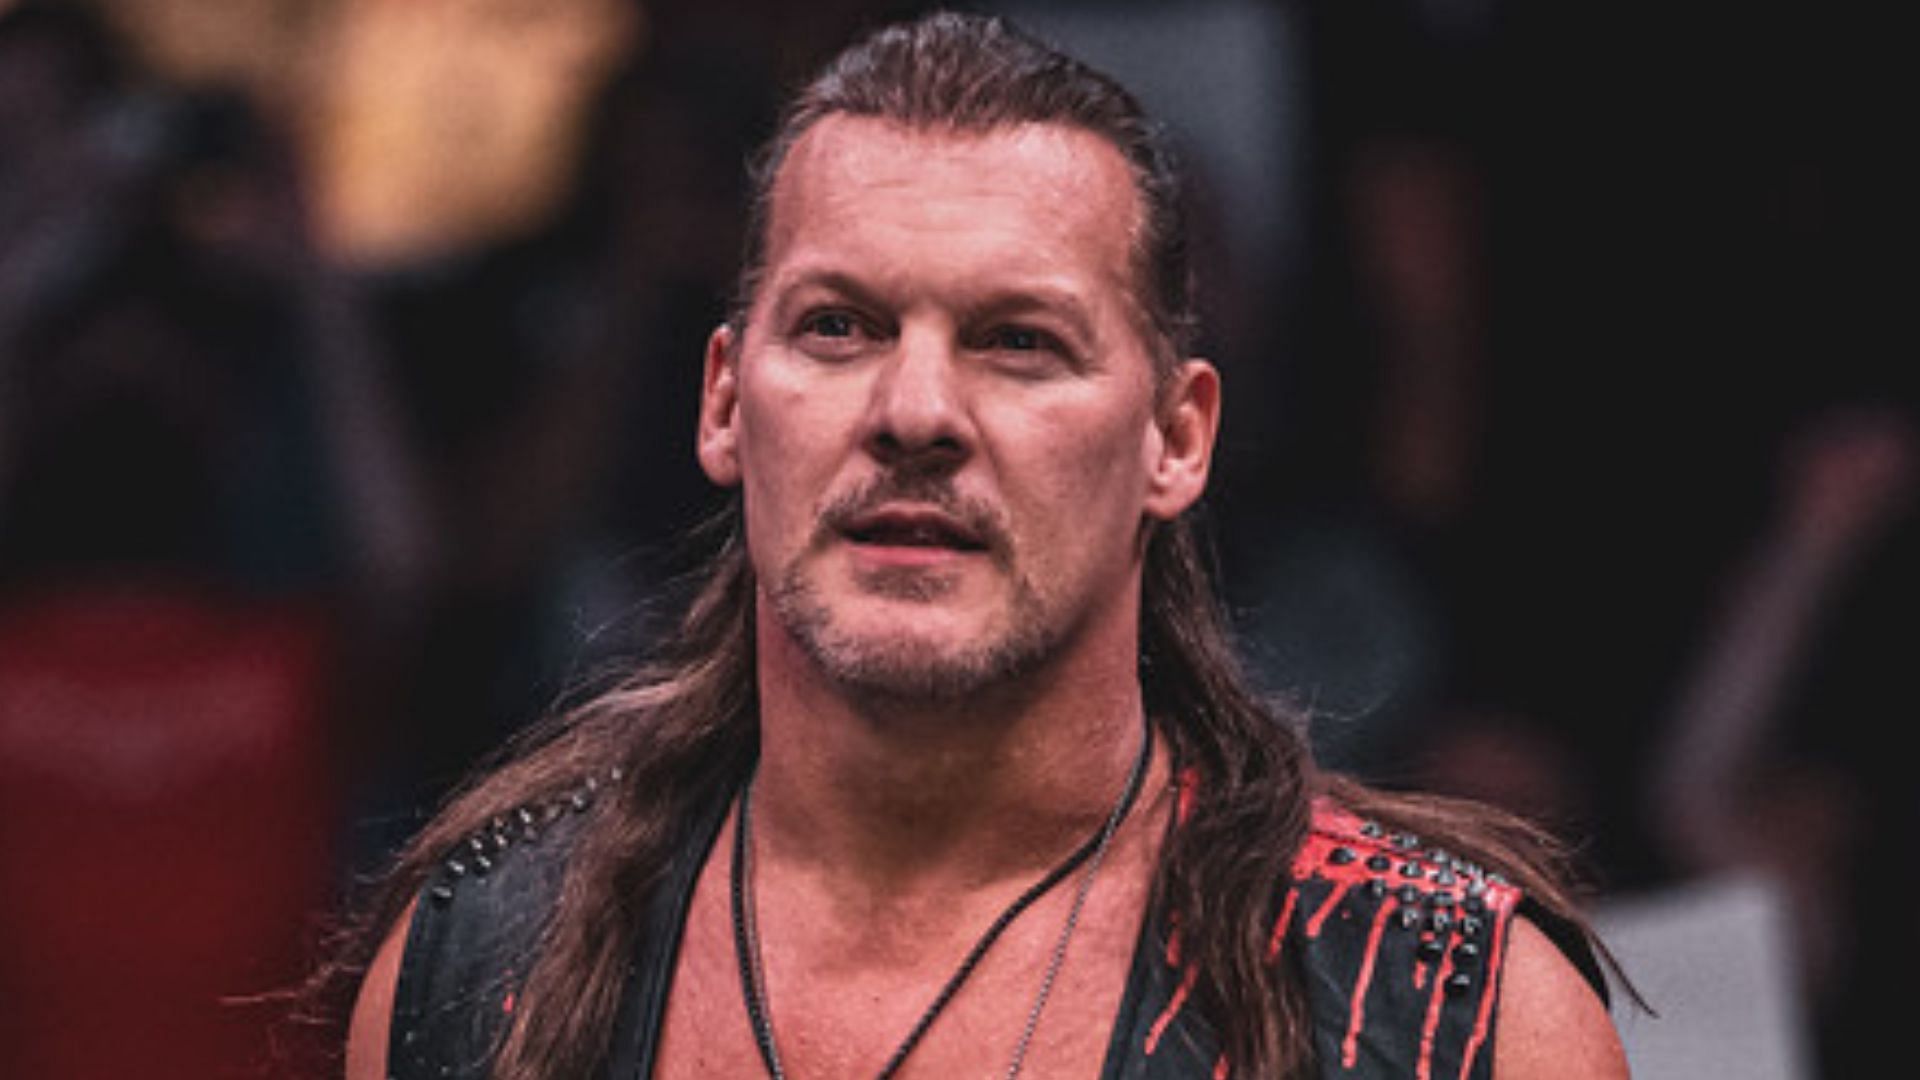 Chris Jericho making his entrance at an AEW event